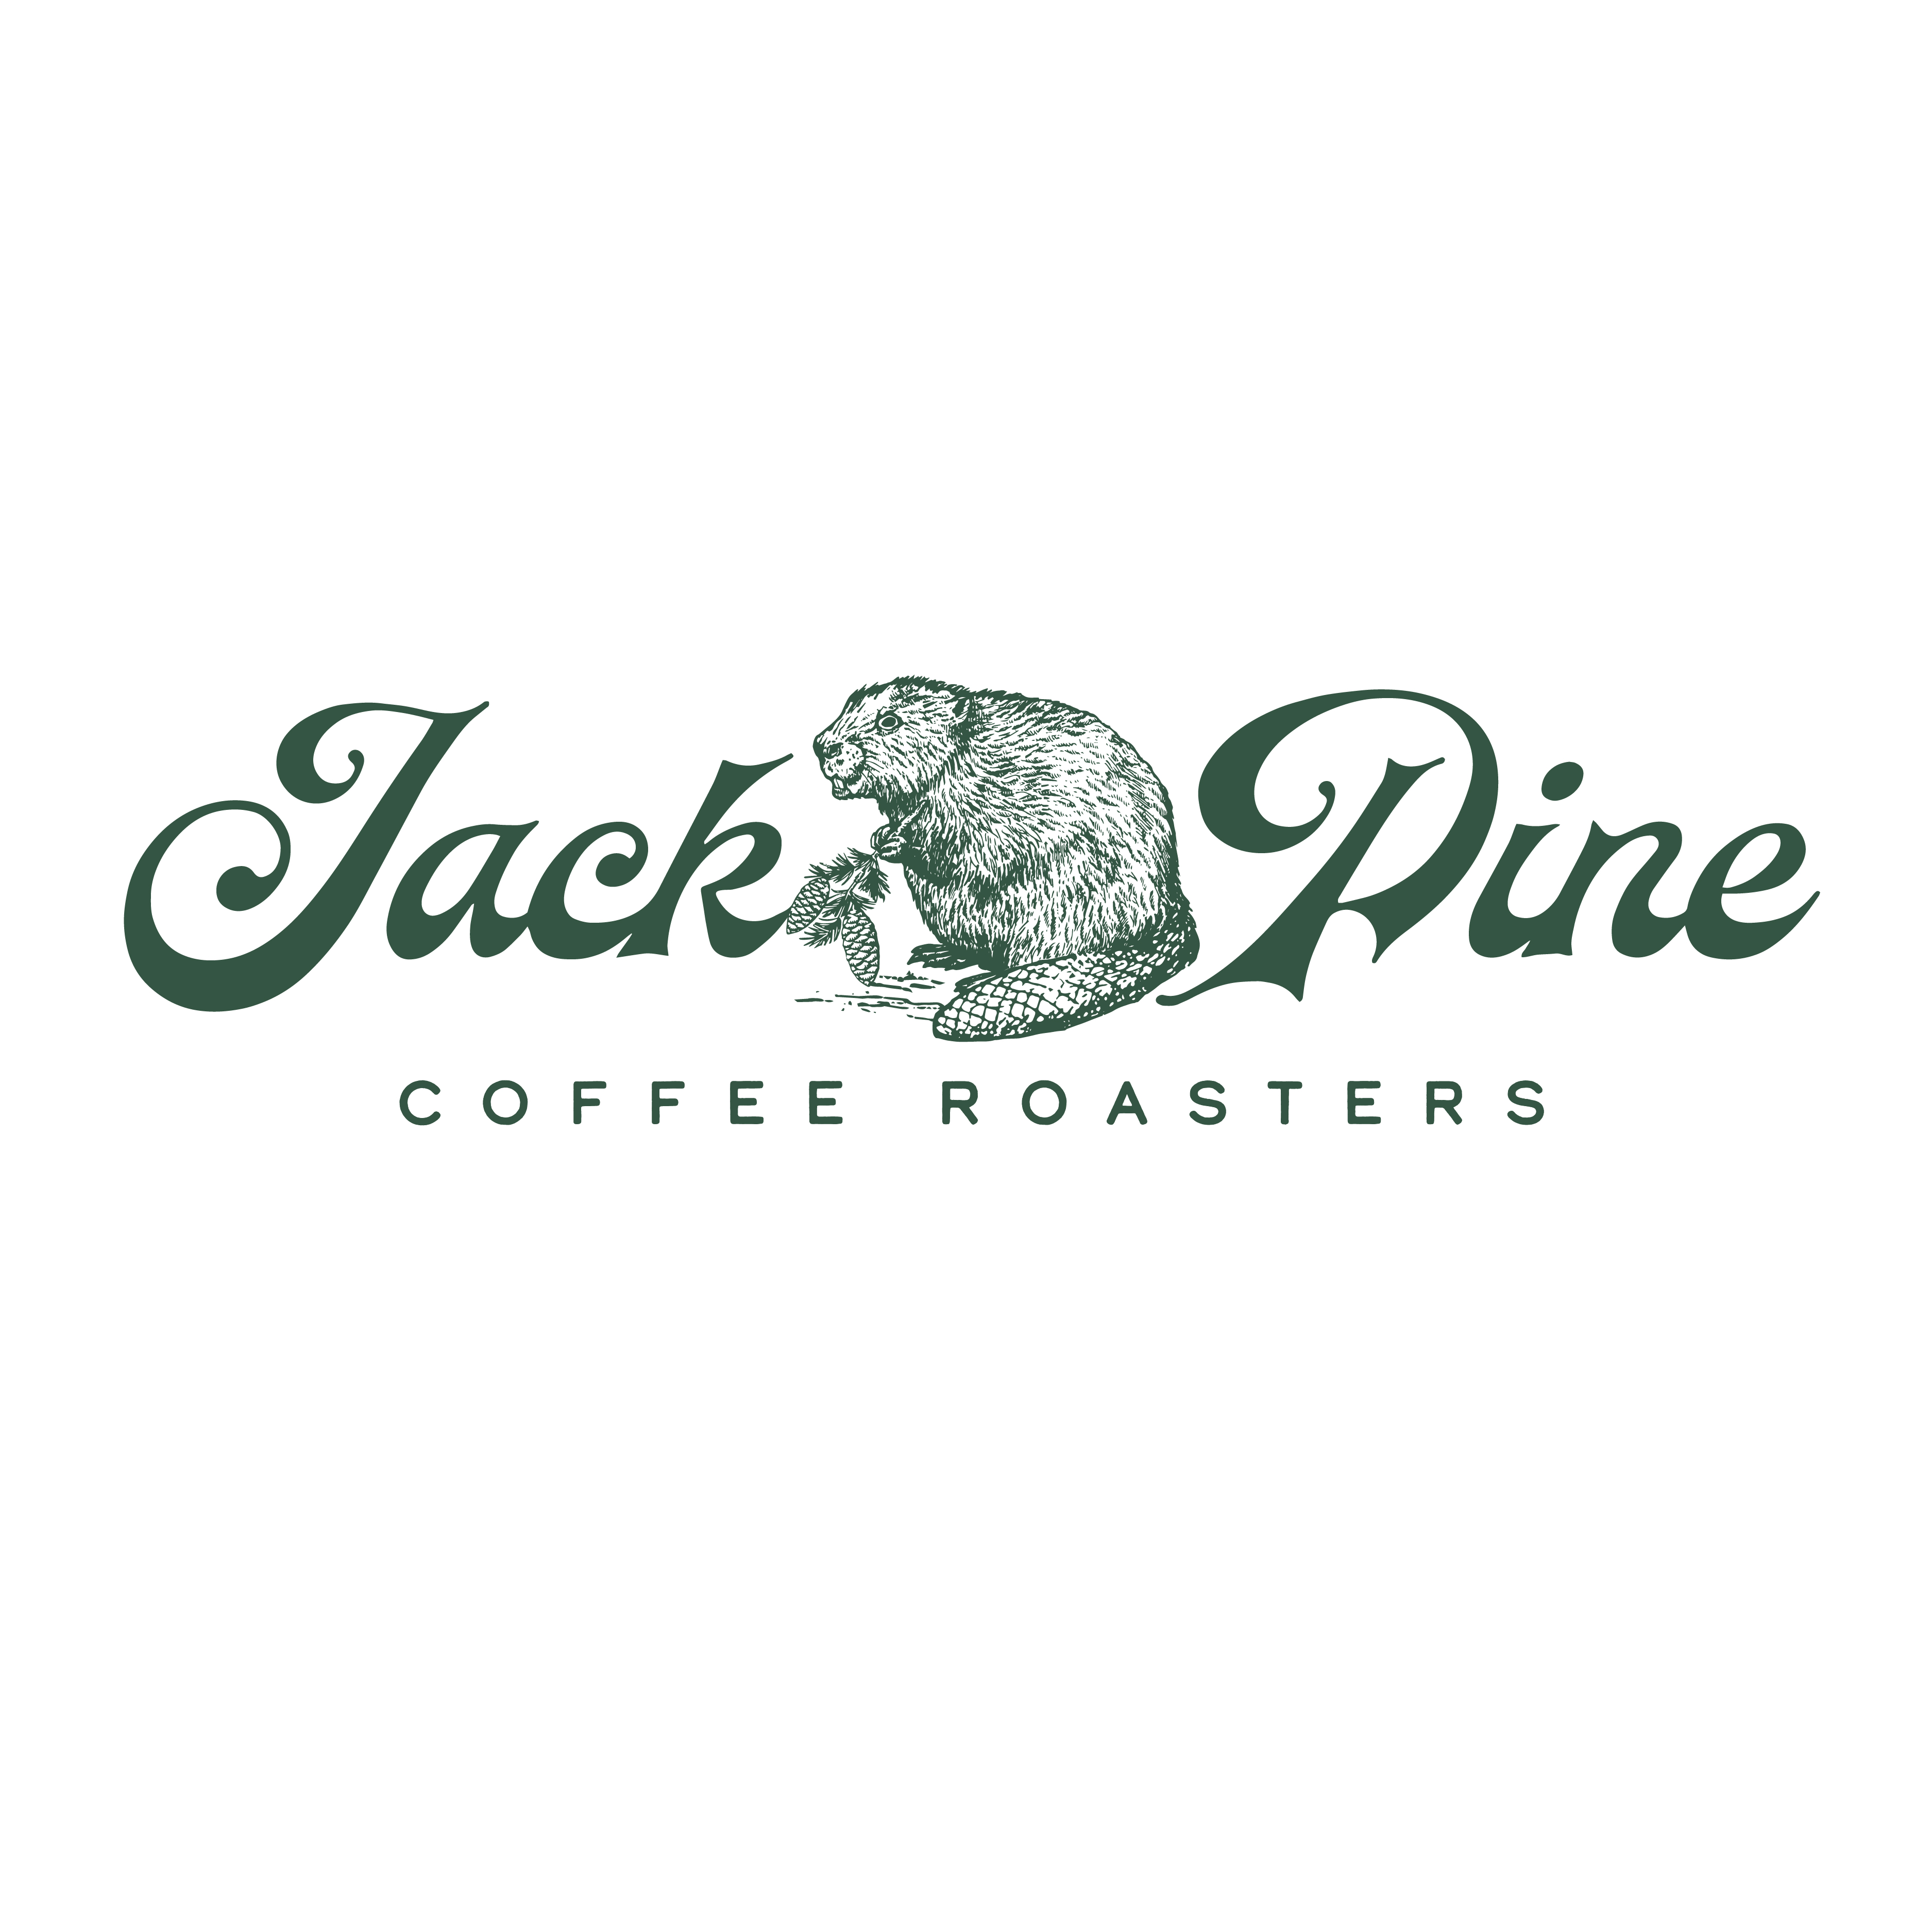 Jack Pine Coffee Roasters logo design by logo designer Caribou Creative for your inspiration and for the worlds largest logo competition